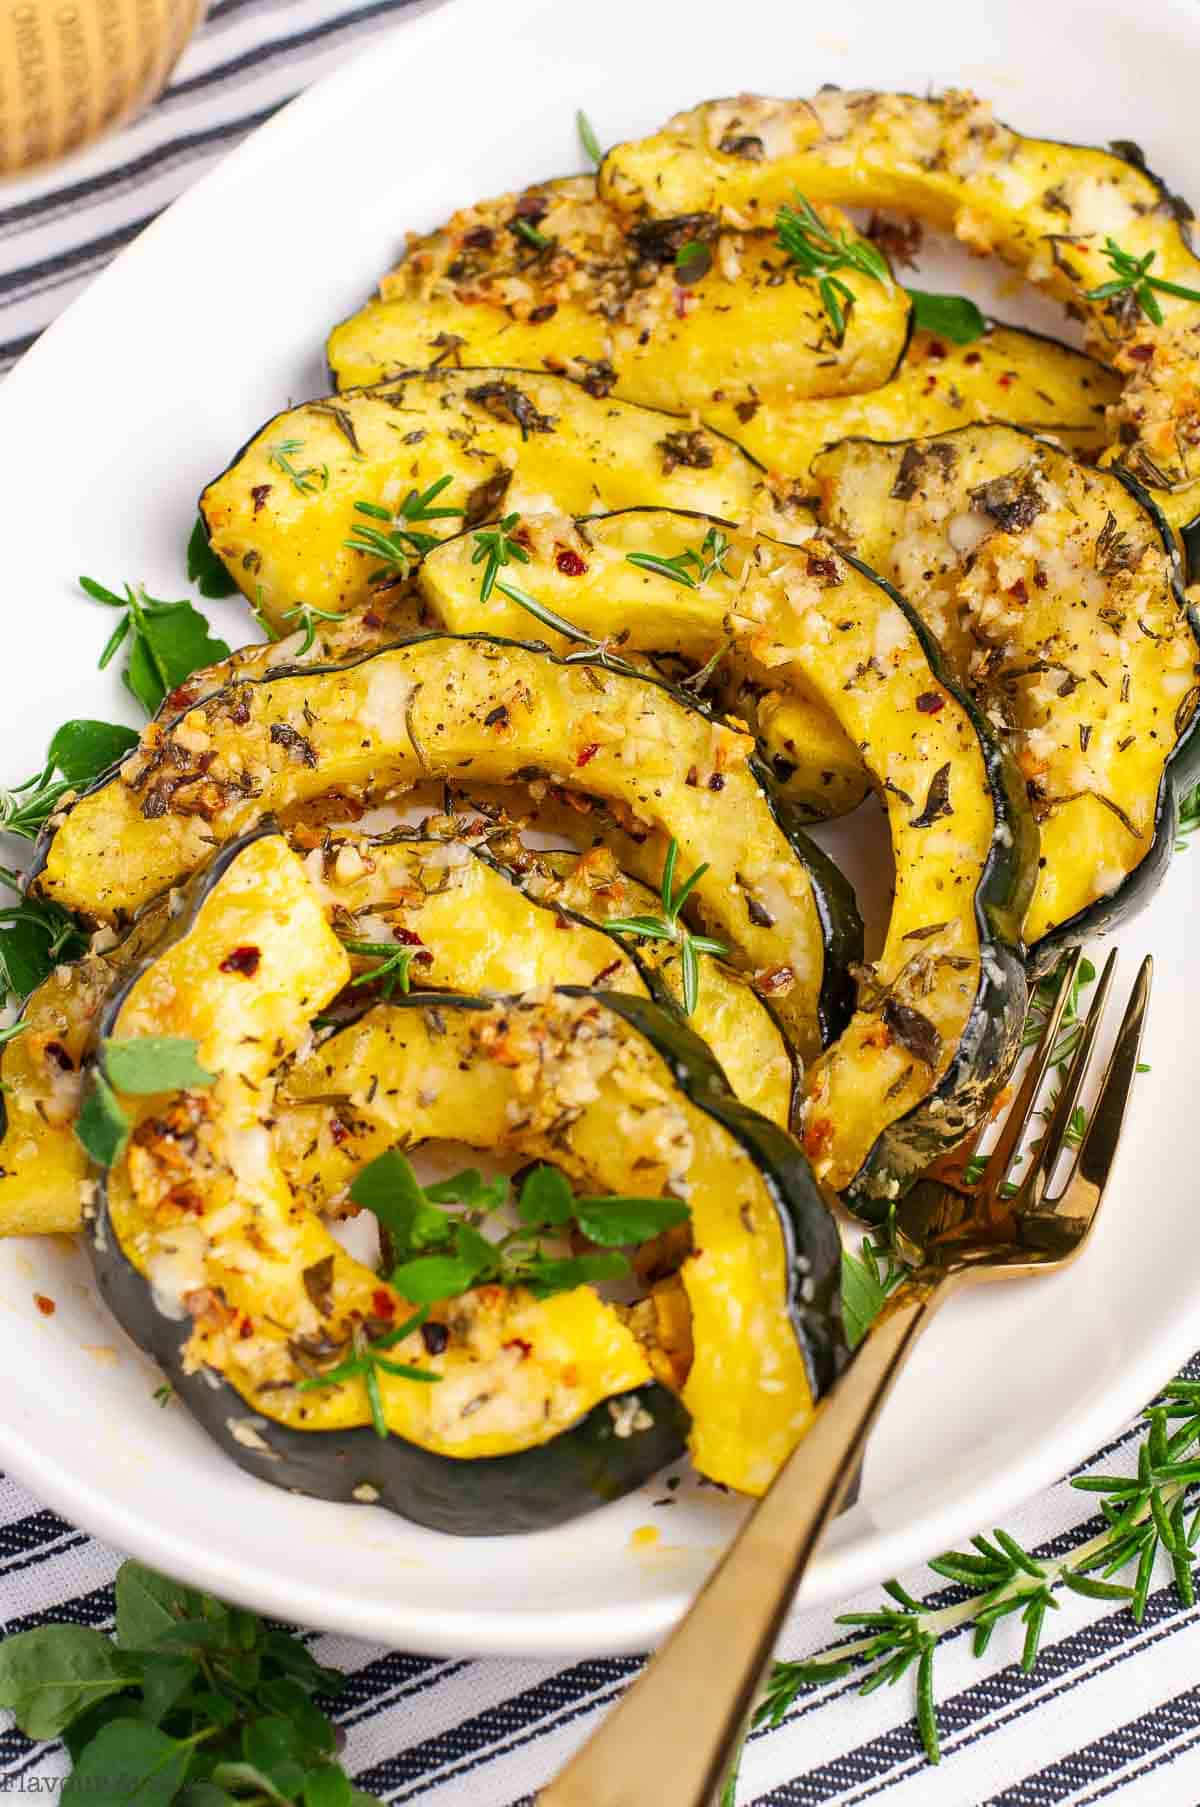 A platter of garlic-parmesan roasted acorn squash slices with fresh herbs.